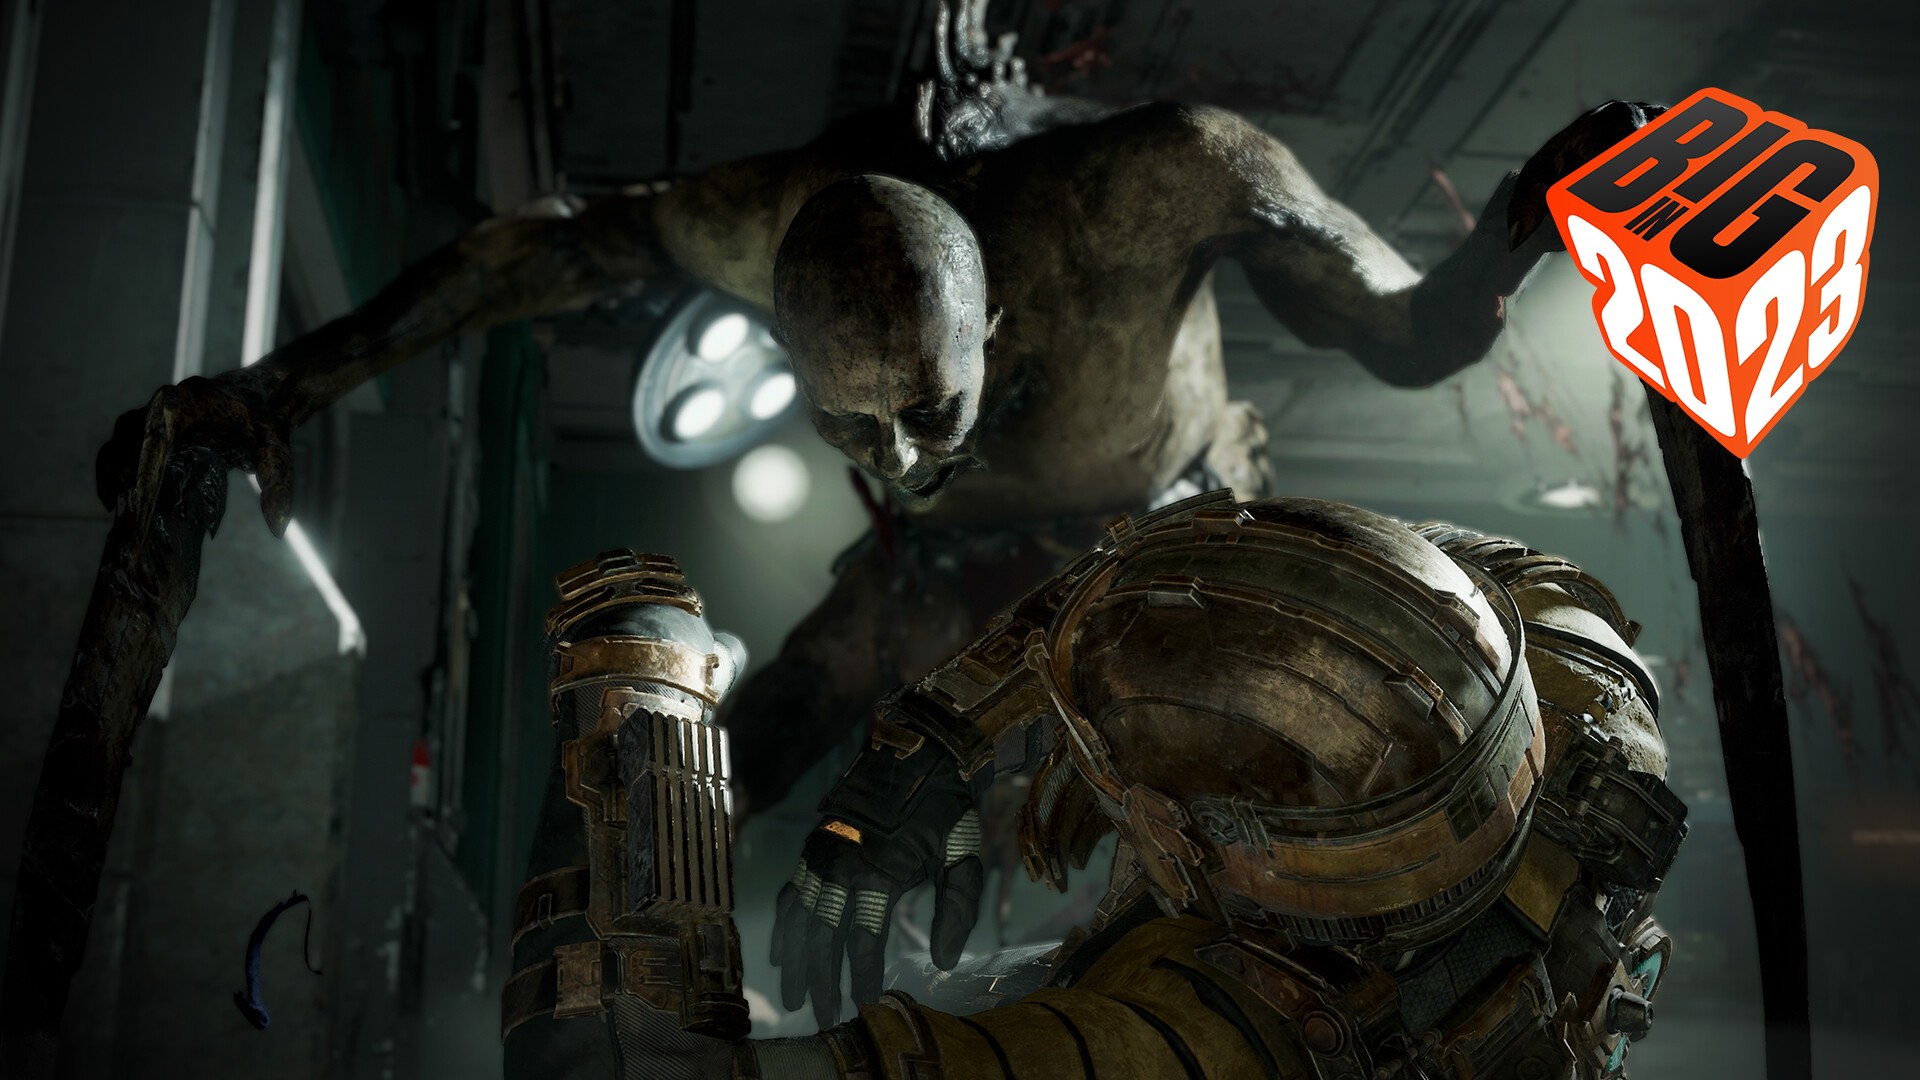 Is Dead Space Remake Coming To Ps4? Will The Dead Space Remake Be